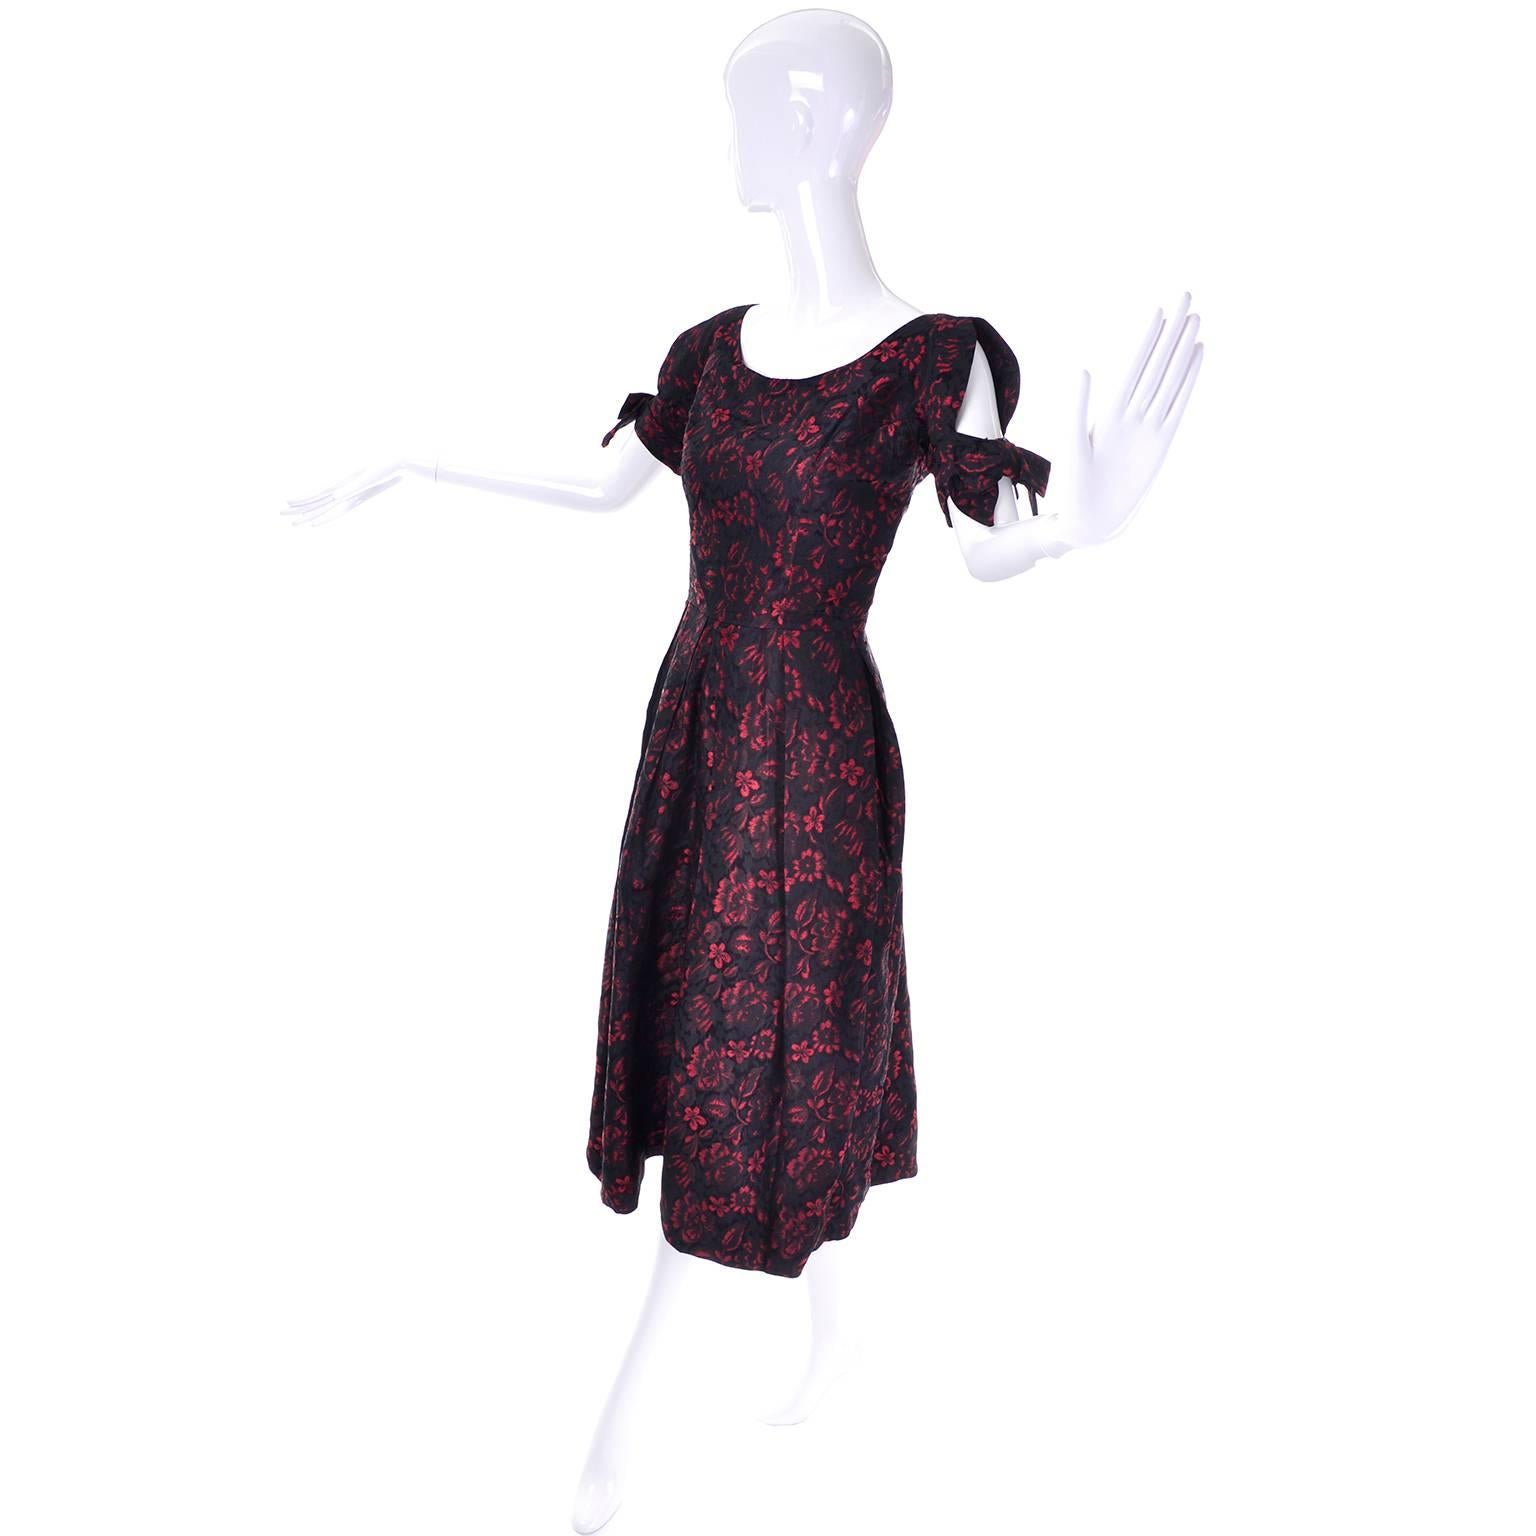 This is a wonderful vintage dress from Suzy Perette in a black and red floral brocade. This 1950's cocktail party dress has gorgeous sleeves with cutouts and it has an attractive, flattering fit.  There are two pleats in the front, that almost